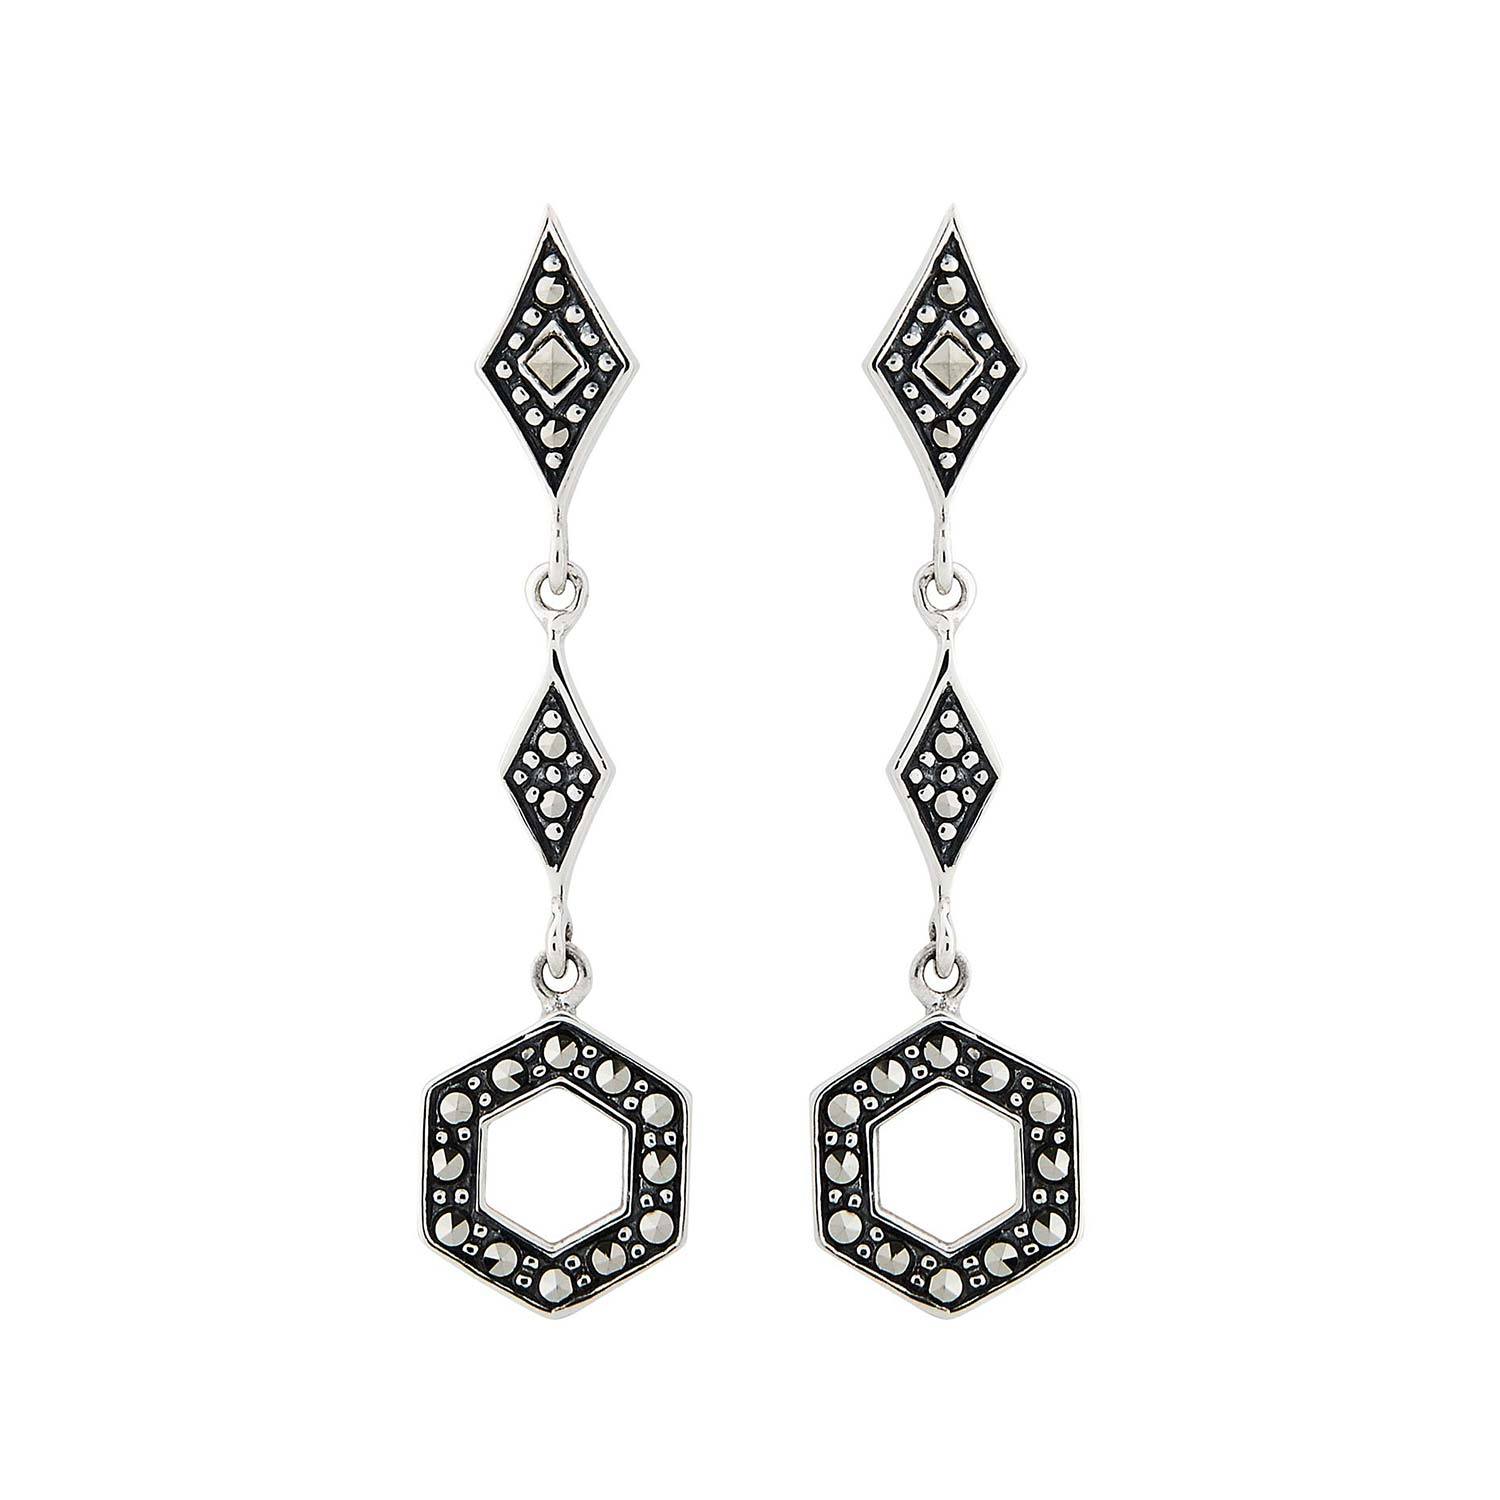 Art Deco Style Geometric Drop Earrings: Marcasite and Sterling Silver